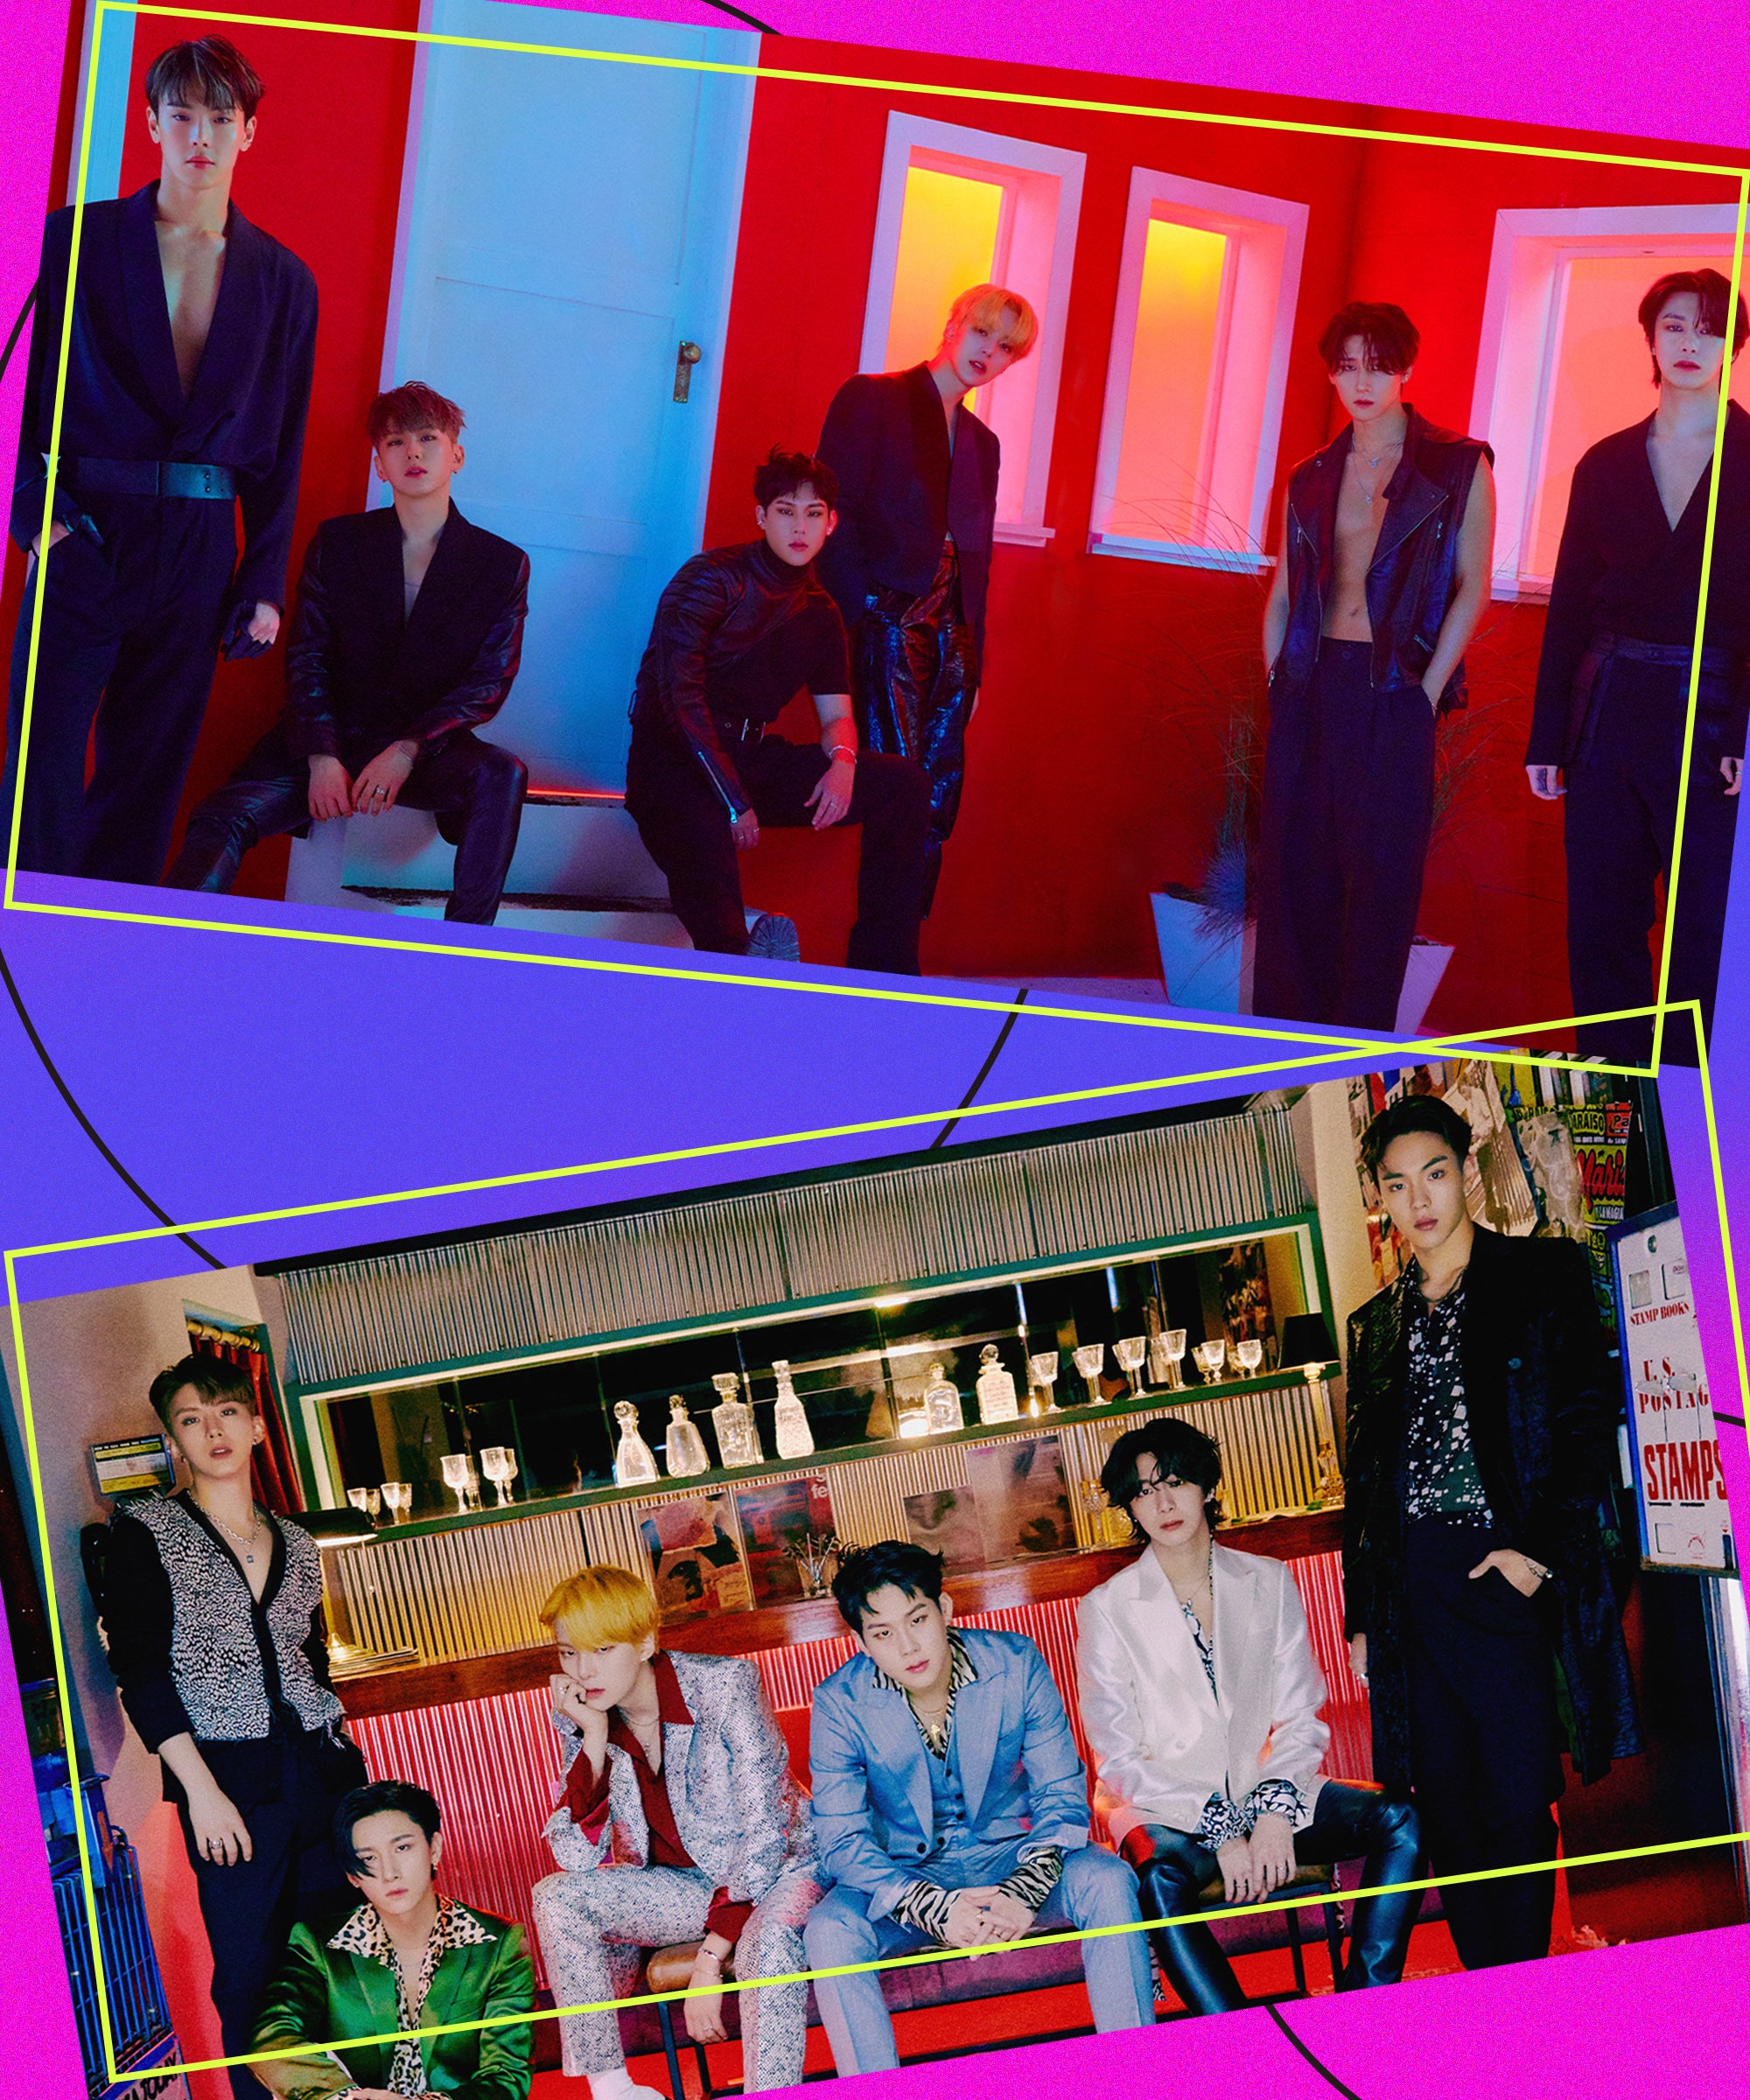 It's really precious to us”: Monsta X on 'One of a Kind